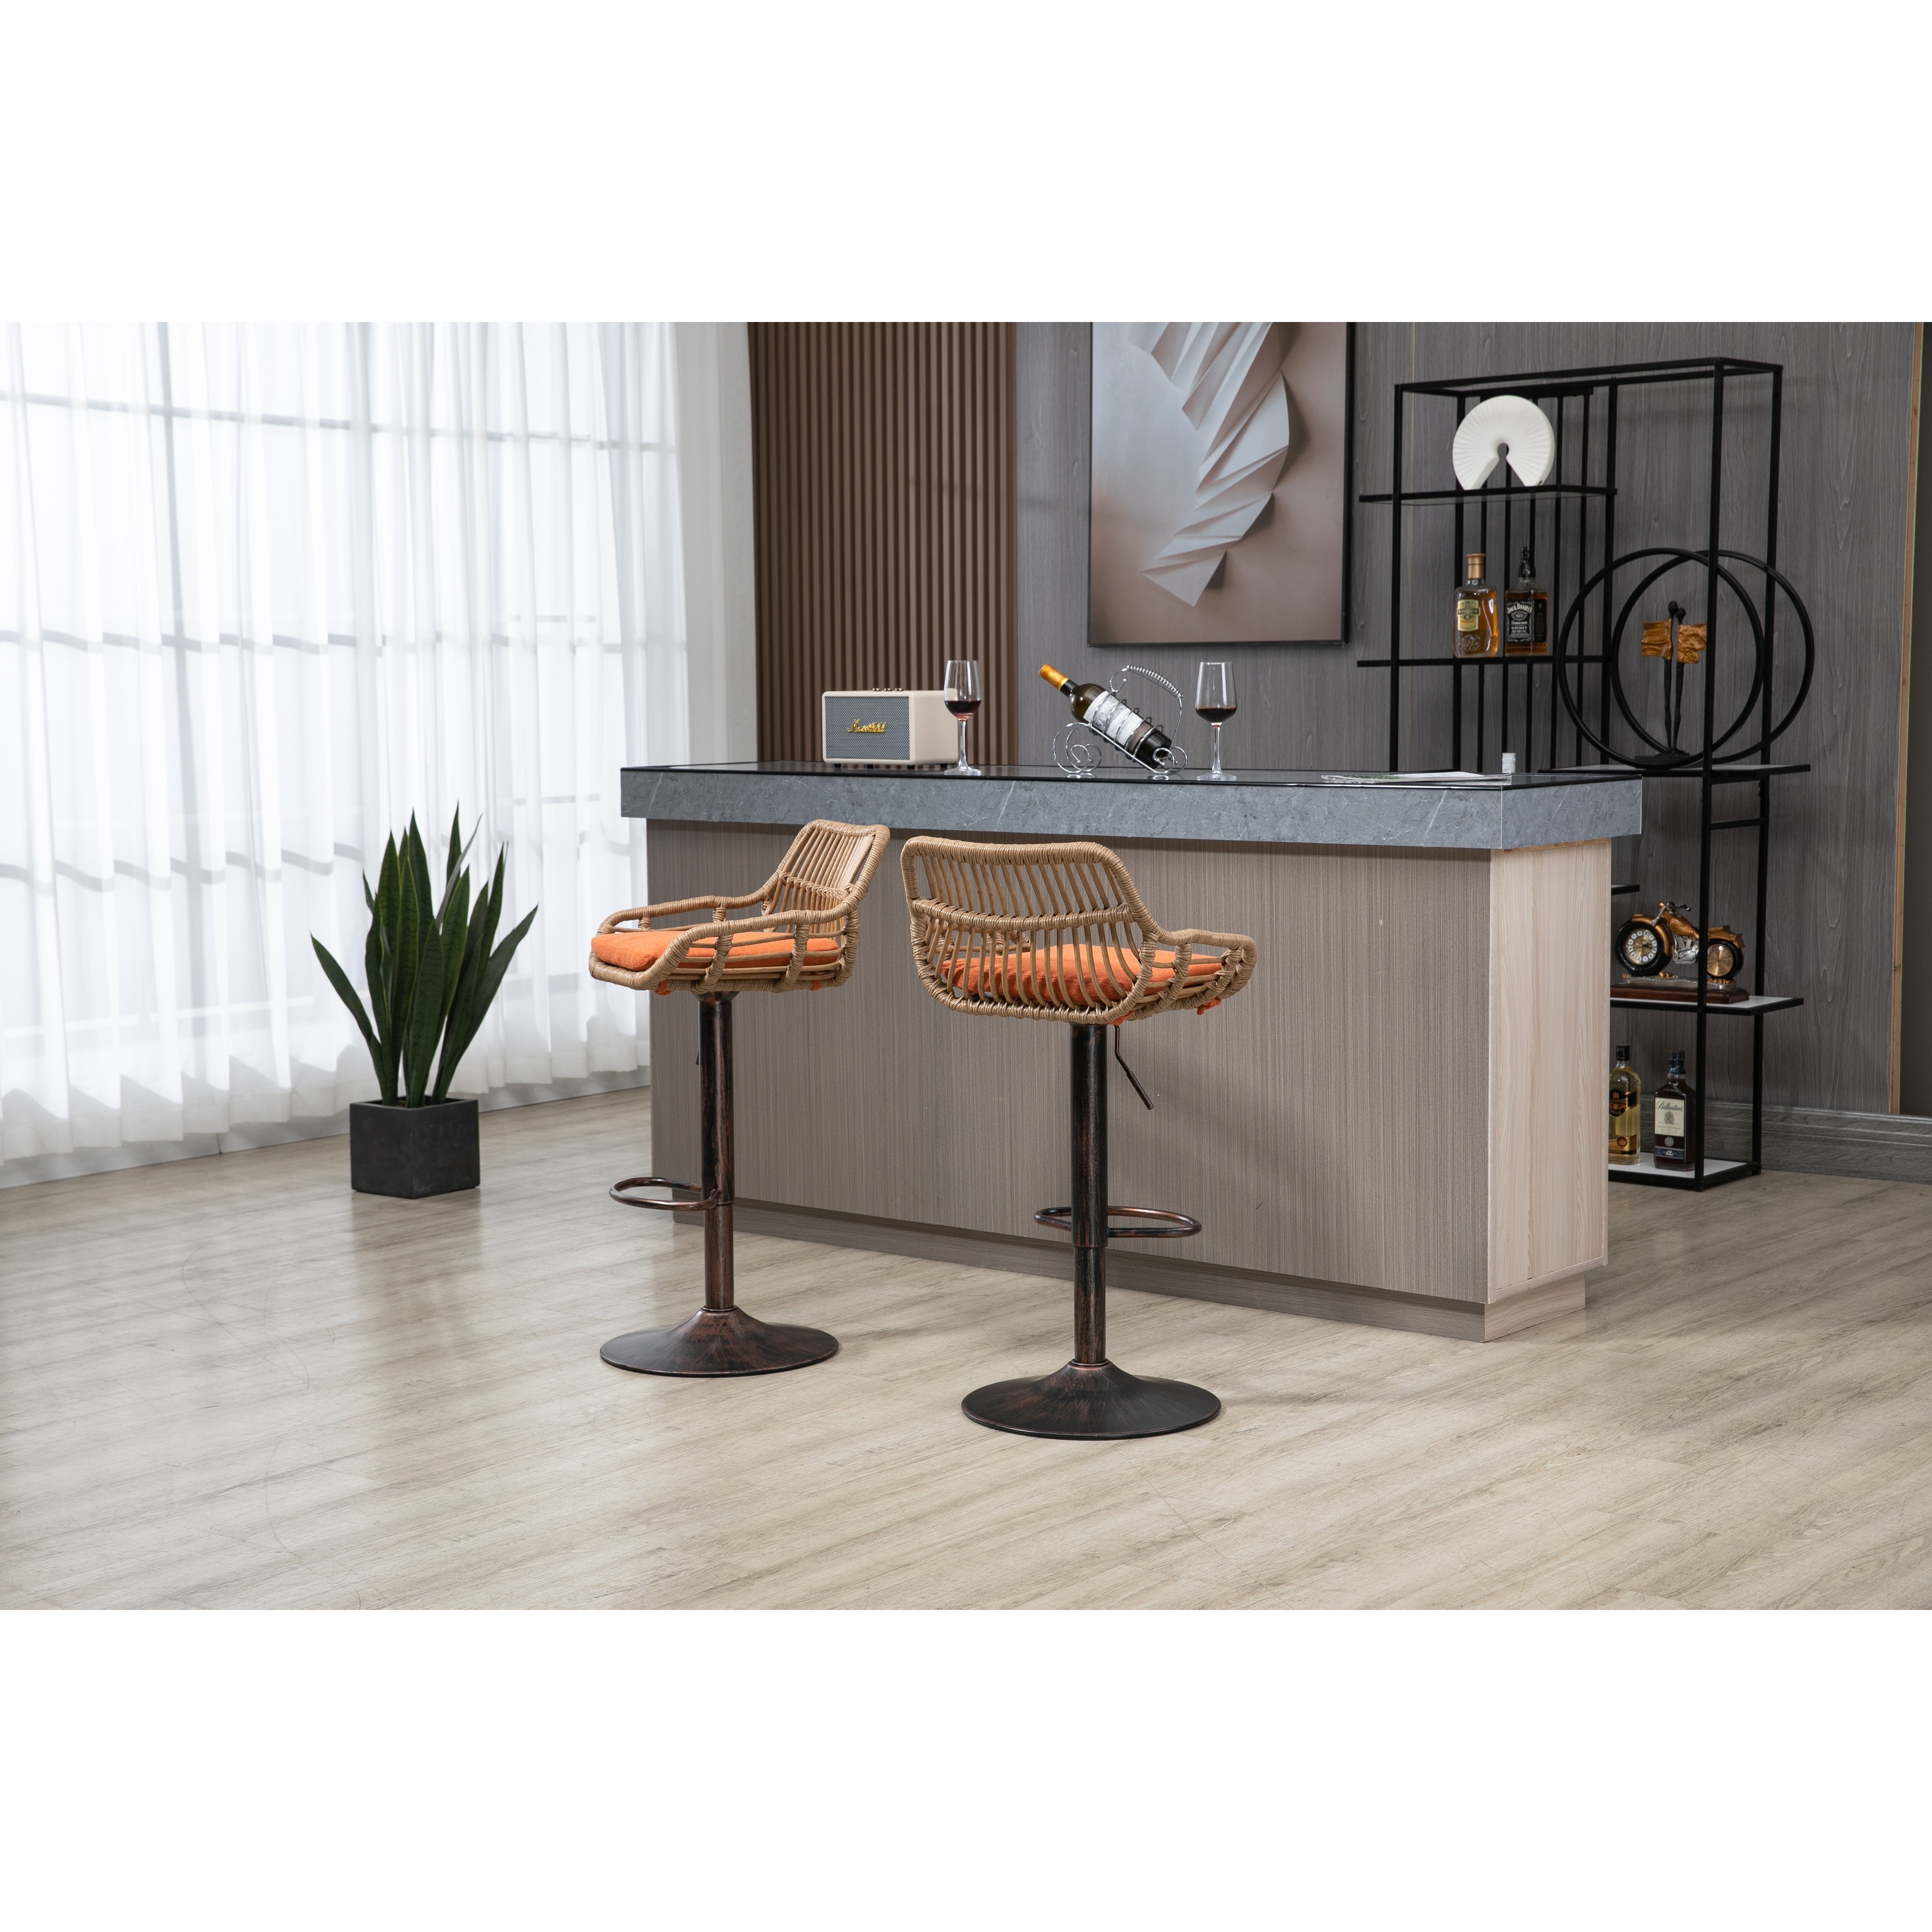 https://ak1.ostkcdn.com/images/products/is/images/direct/8c9d519f9549e795022b55e685f5a8704cfb2f27/Vintage-Swivel-Bar-Stools-Set-of-2%2C-Rattan-Weave-Chairs-with-Footrest-%26-Upholstered%2C-Adjustable-Height%2C-for-Kitchen%2C-Dining-Room.jpg